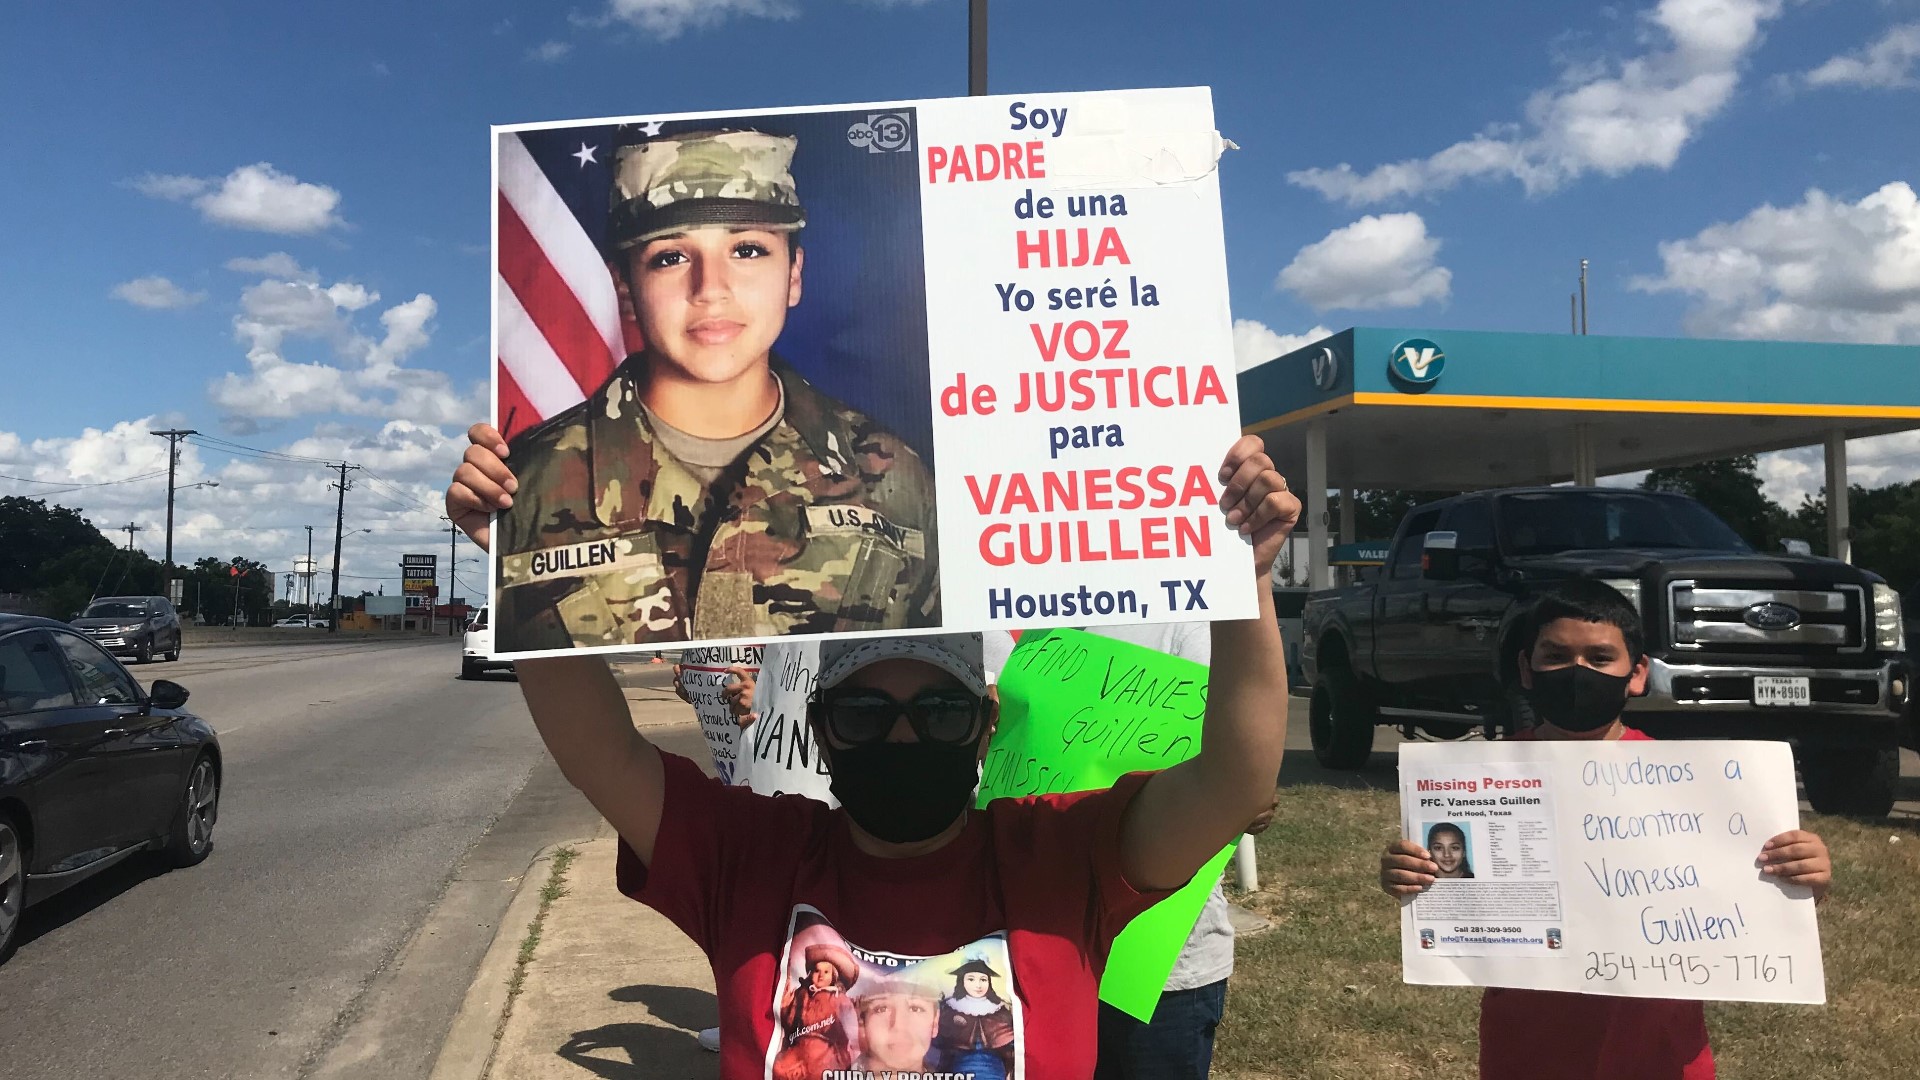 Another rally was held Friday in a continued push to get answers about the disappearance of Vanessa Guillen.